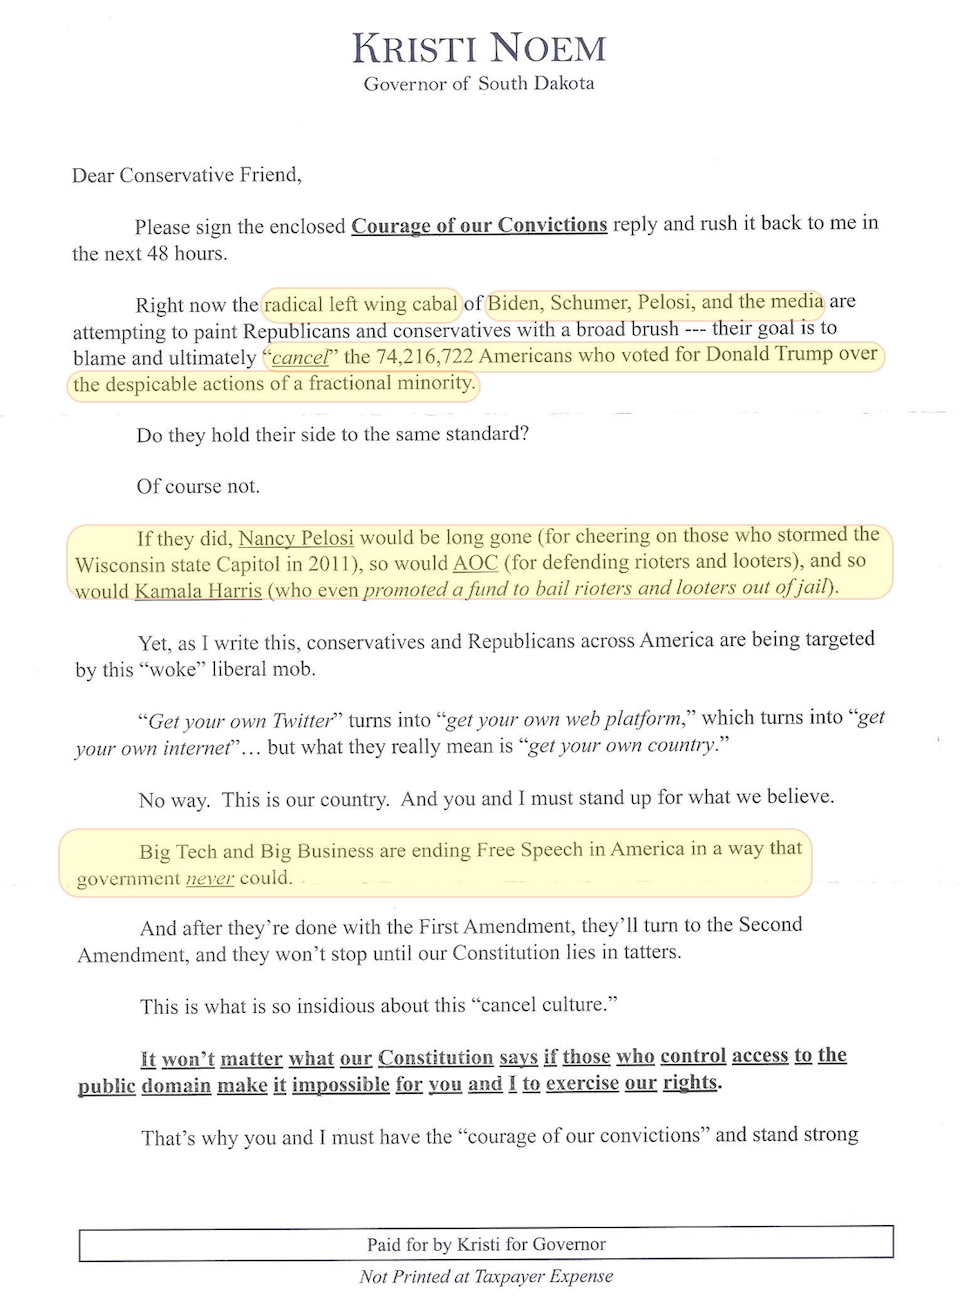 Noem fundraising letter, June 2021, p.1, annotated by DFP.